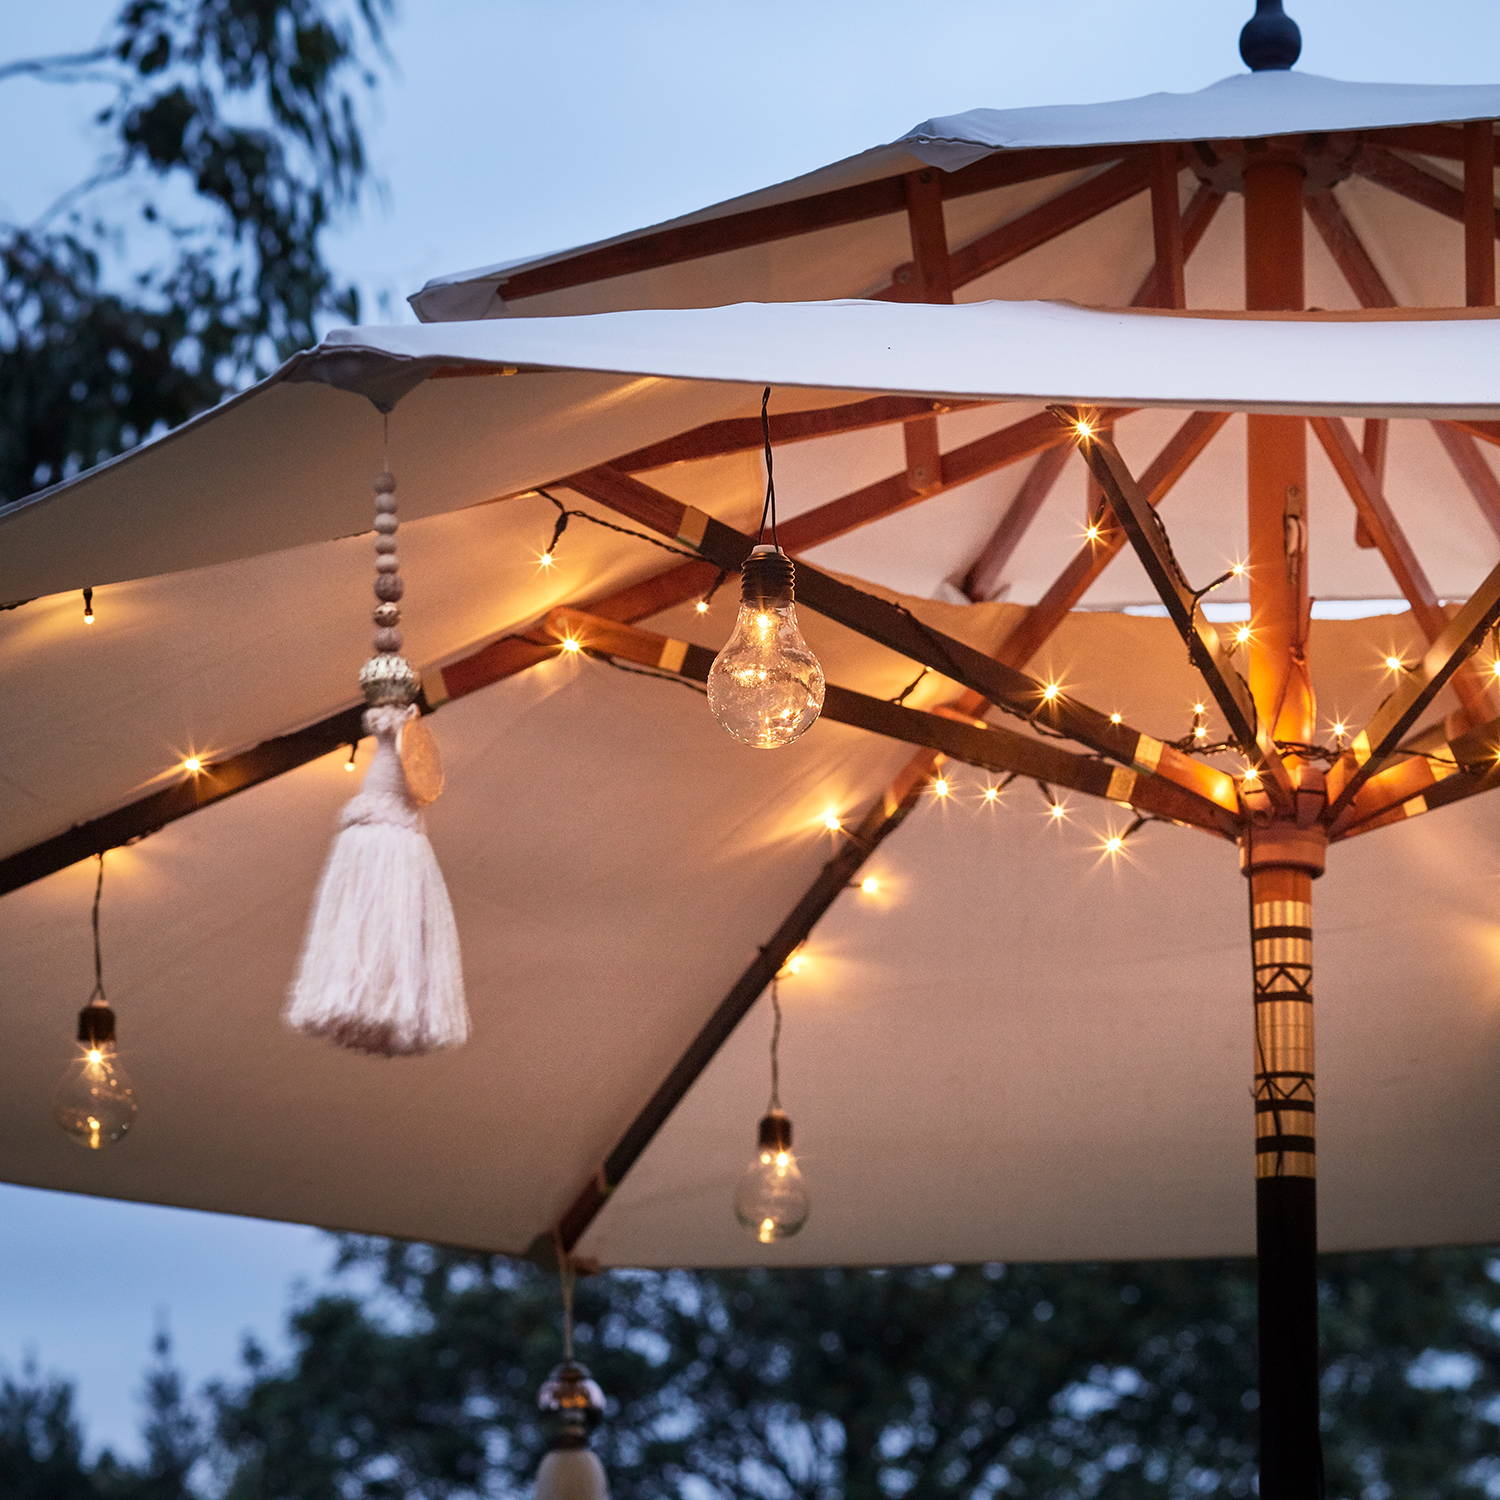 Warm white string lights with festoons in a parasol at night.